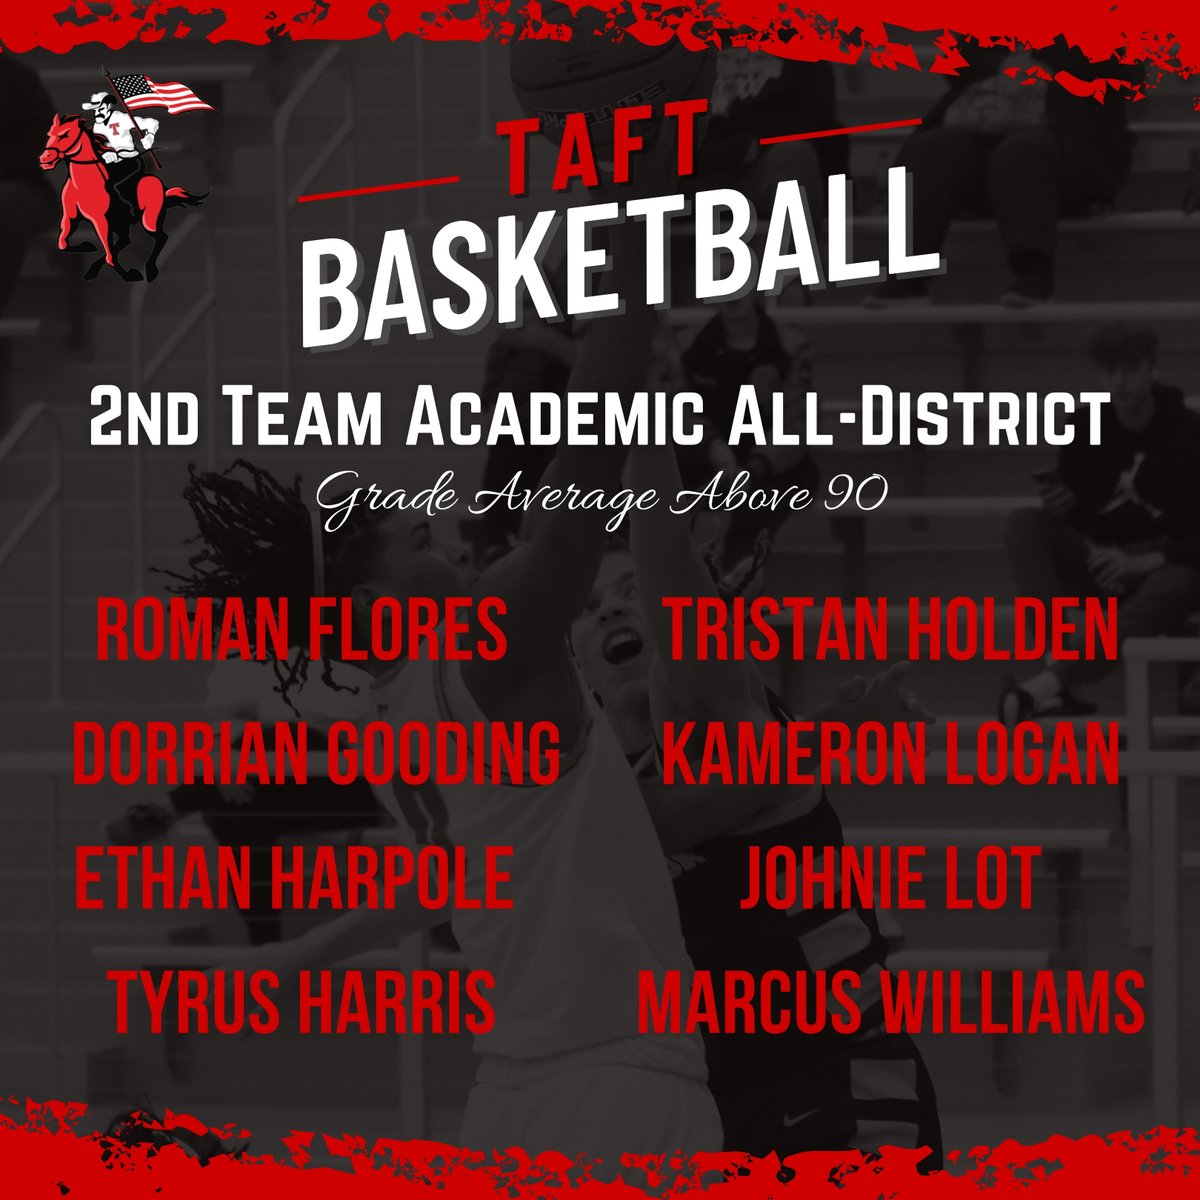 TAFT Boys Basketball 2nd TEAM ACADEMIC ALL-DISTRICT🏀📚 We couldn't be more proud of the excellence these young men exemplify in the classroom and on the court! @ethanharpole13 @TyrusHarris2 @ethanharpole13 @TristanLevoy @Johnie_lott1 @5kmarcuss @roman_flores6 @taft_basketball